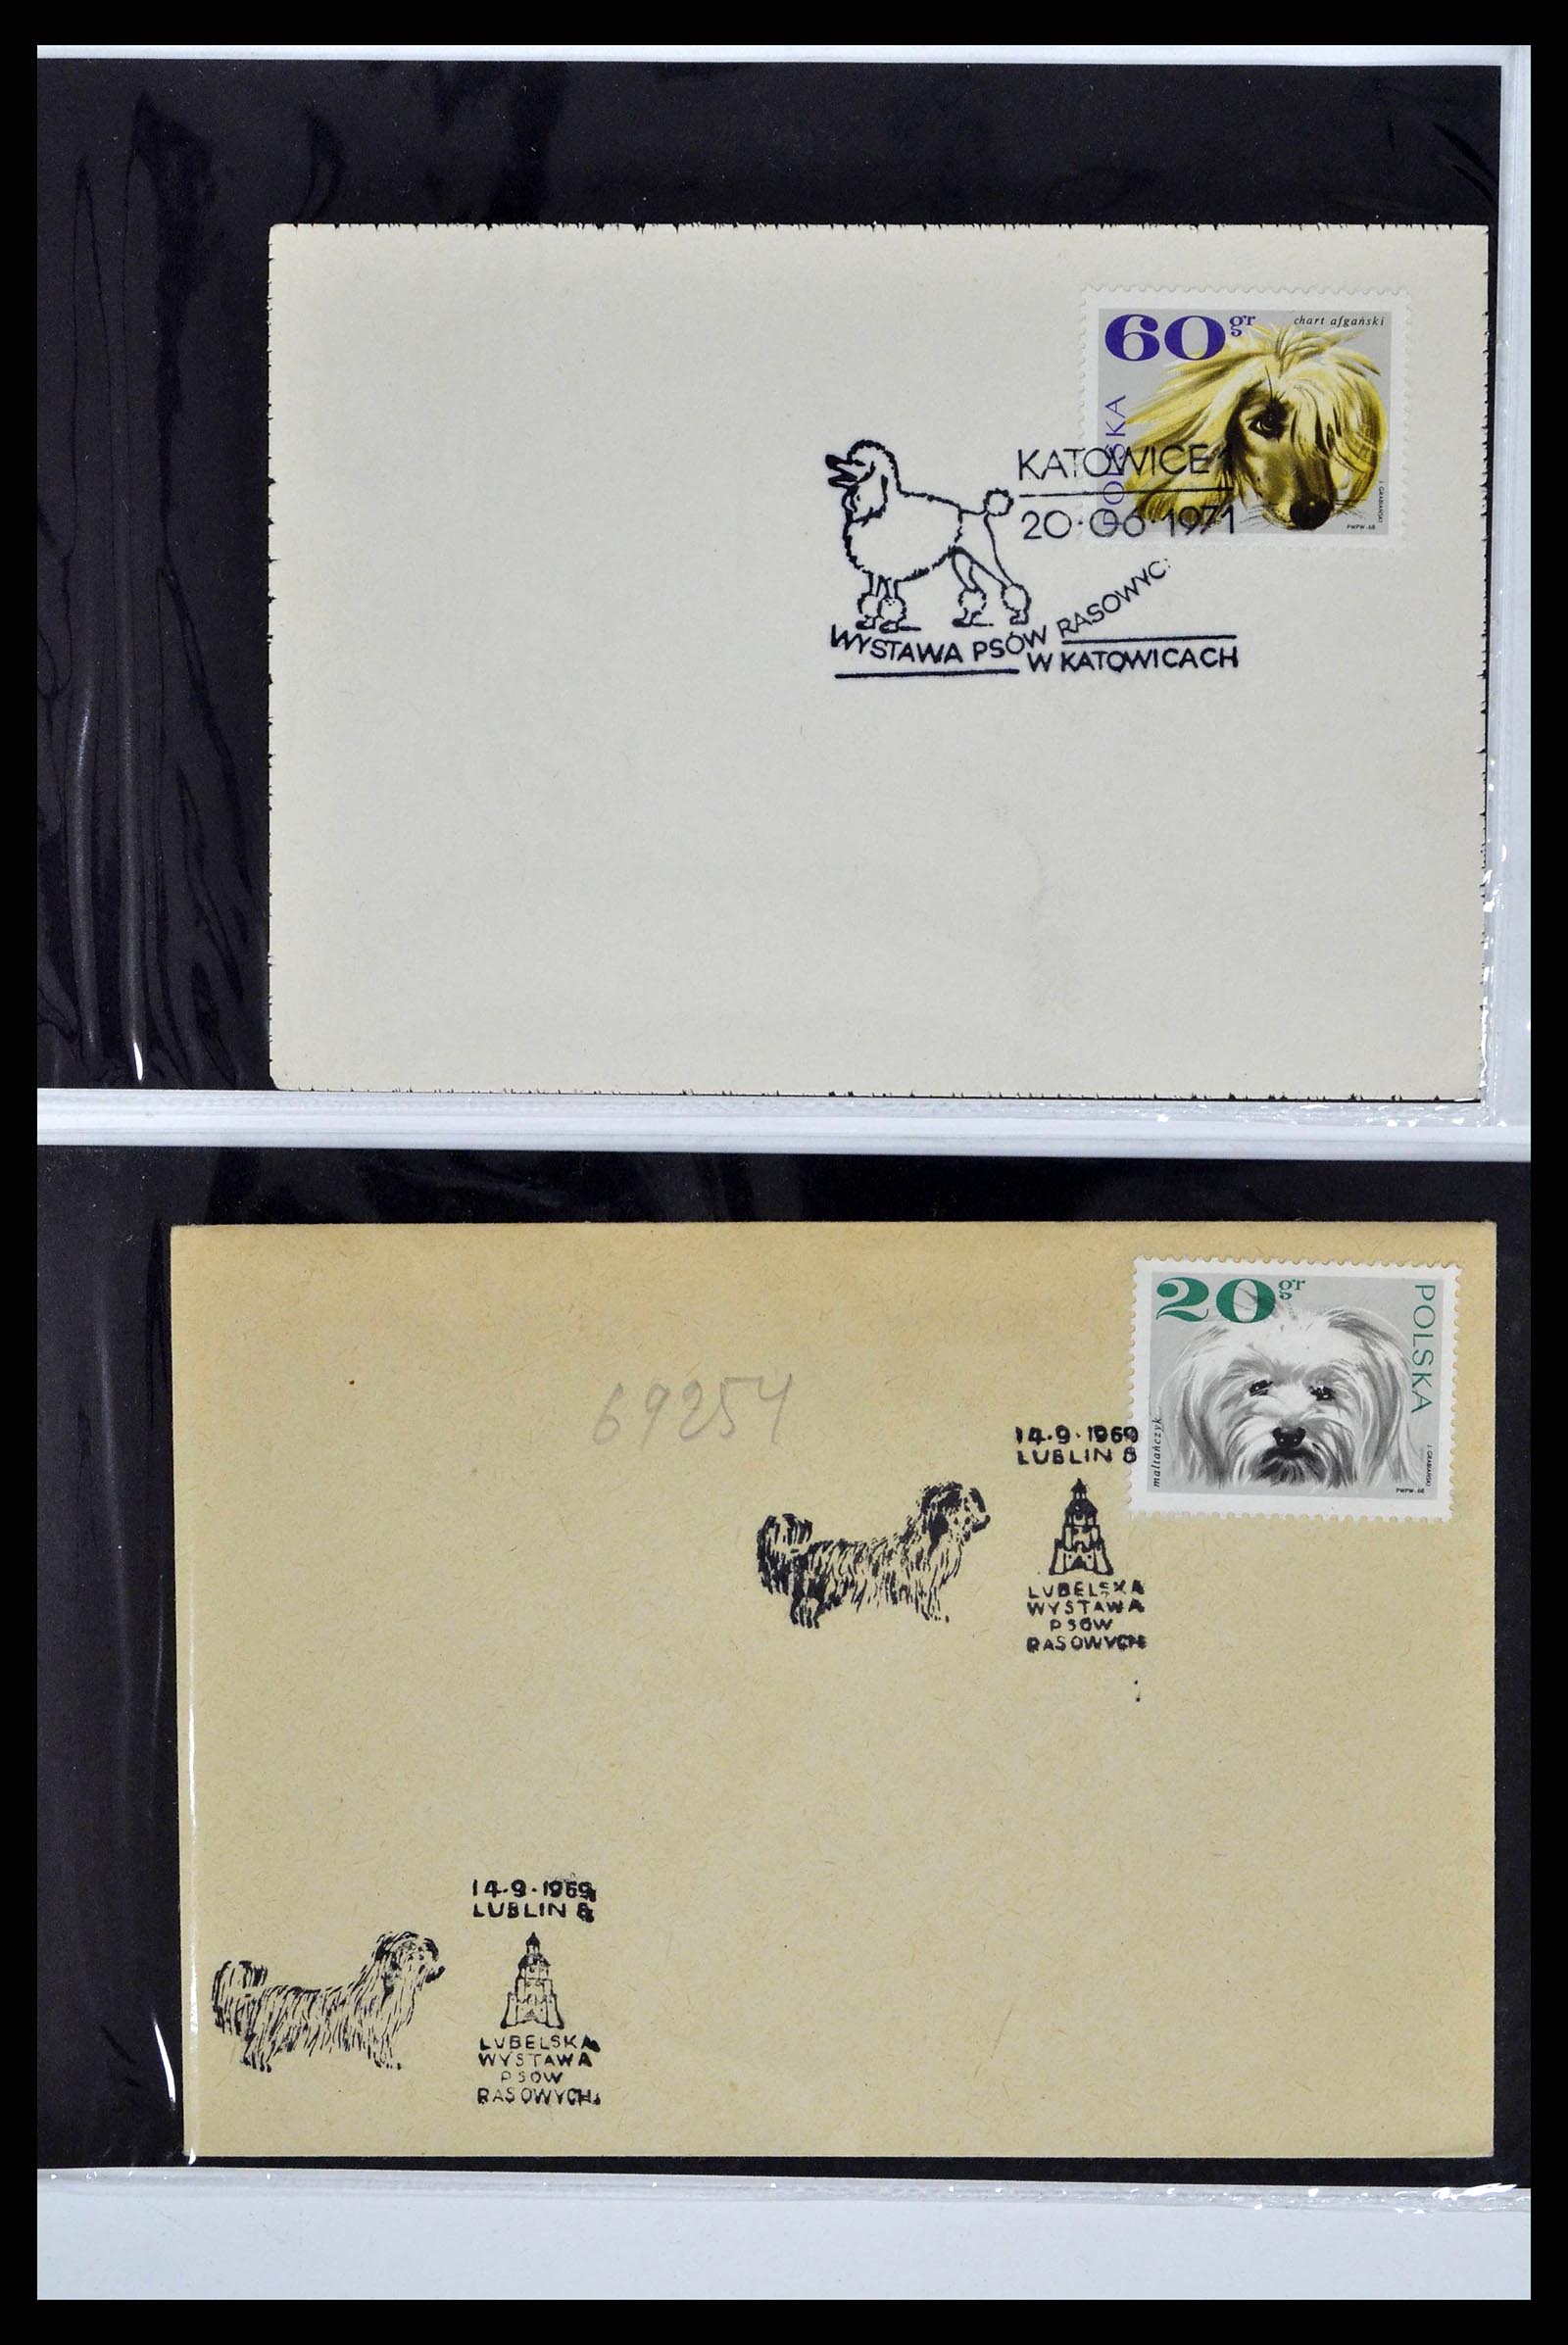 37673 0059 - Stamp collection 37673 Thematics dogs covers 1900-2000.